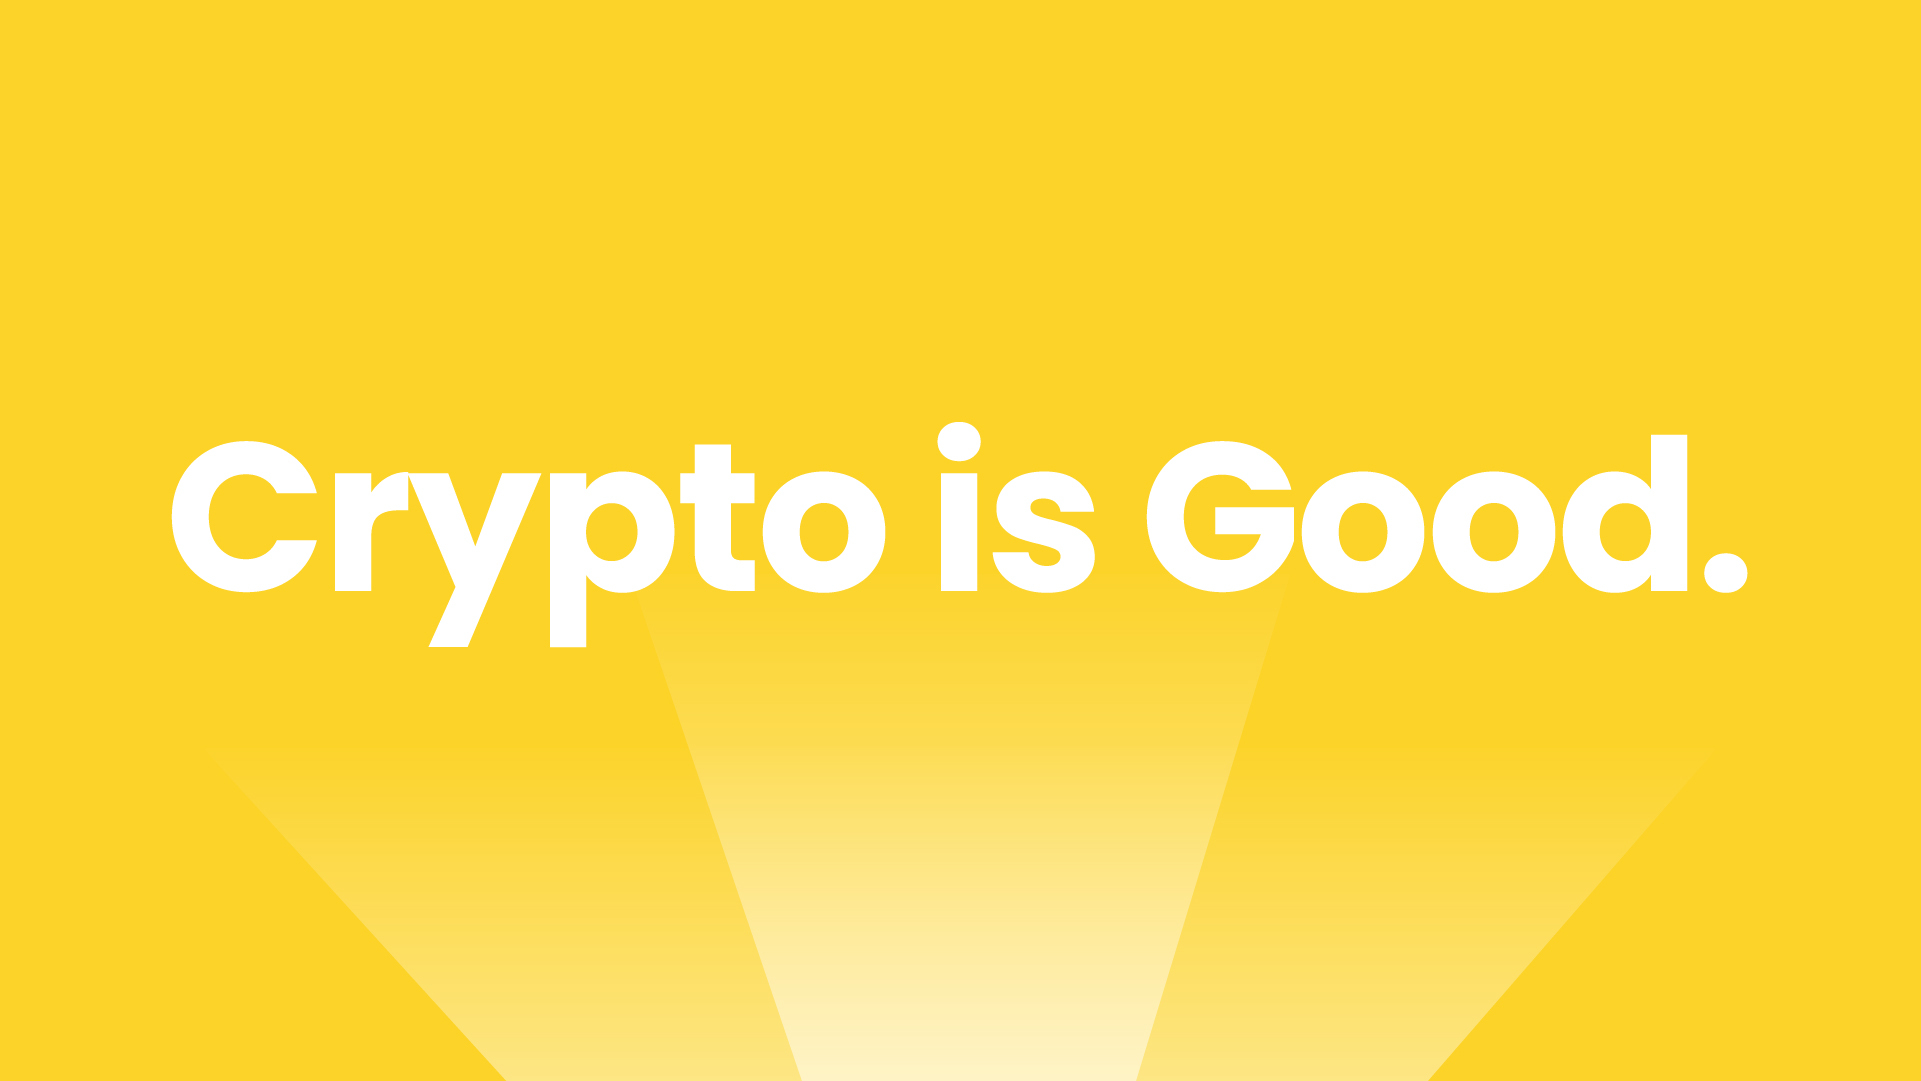 Crypto is Good. The Giving Block’s First Ad Campaign Illuminates Why the Future of Fundraising Looks So Bright